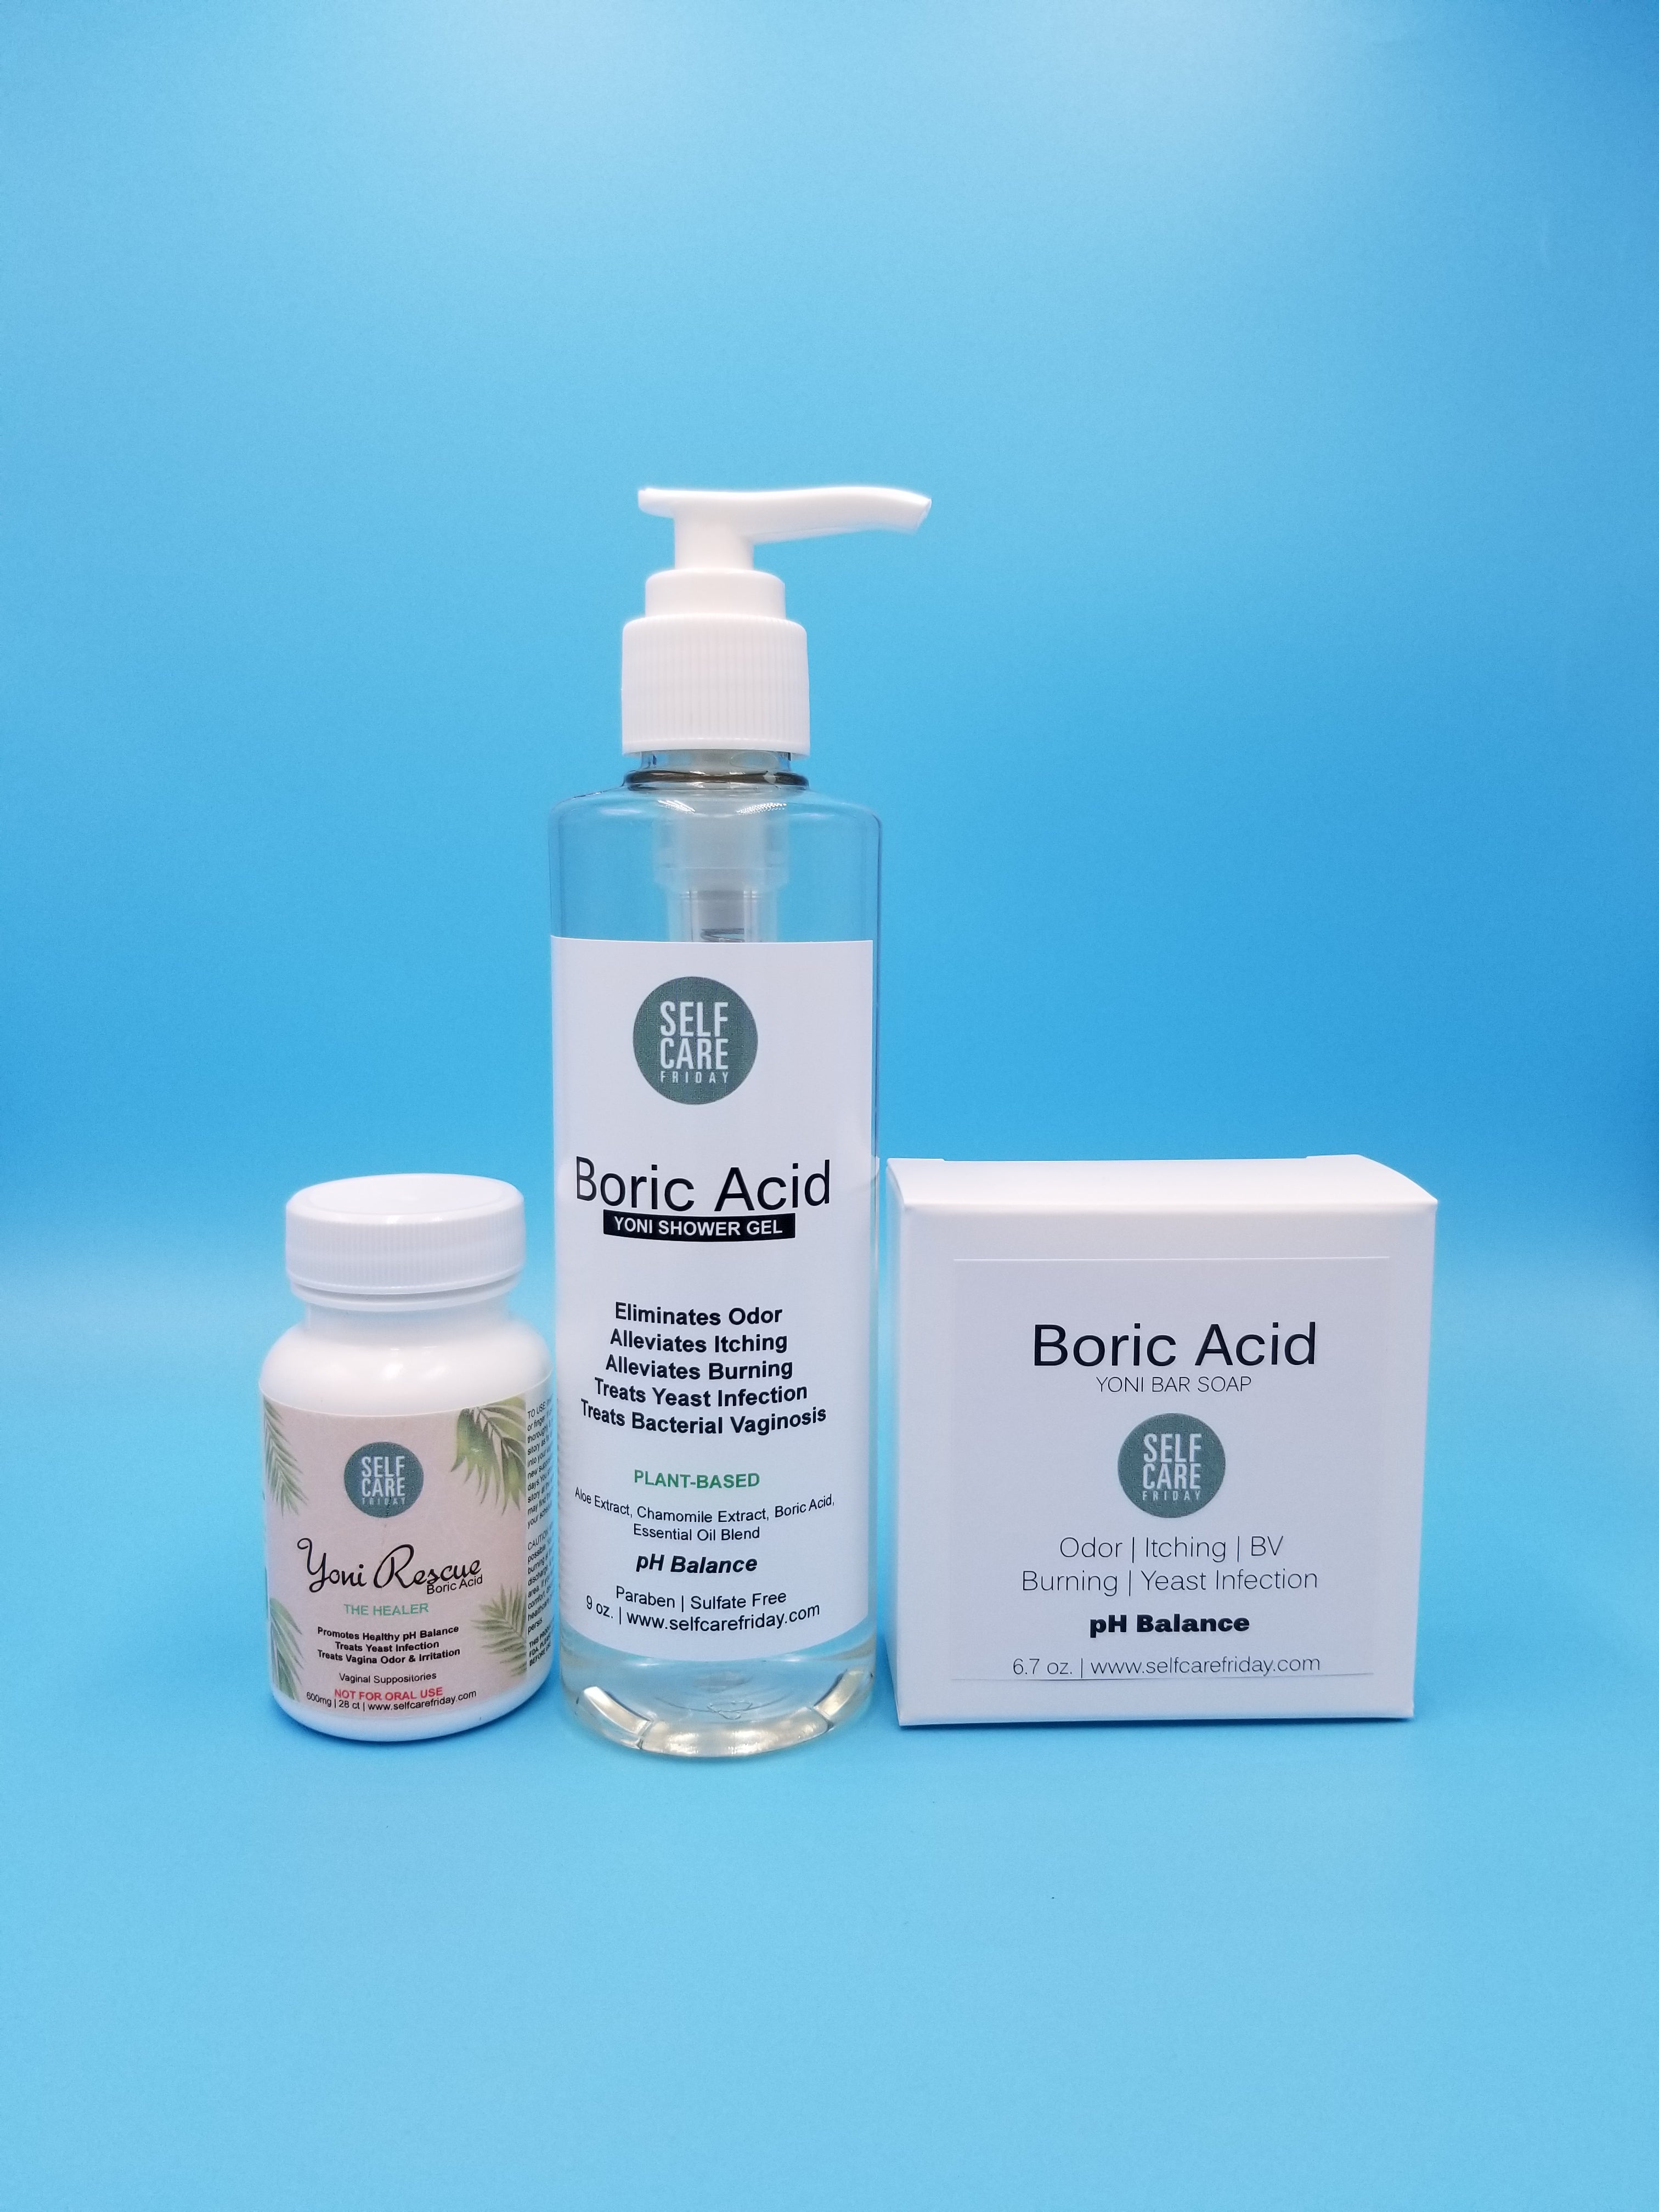 Bv And Yeast Infection Treatment Vaginal Health Boric Acid Bundle